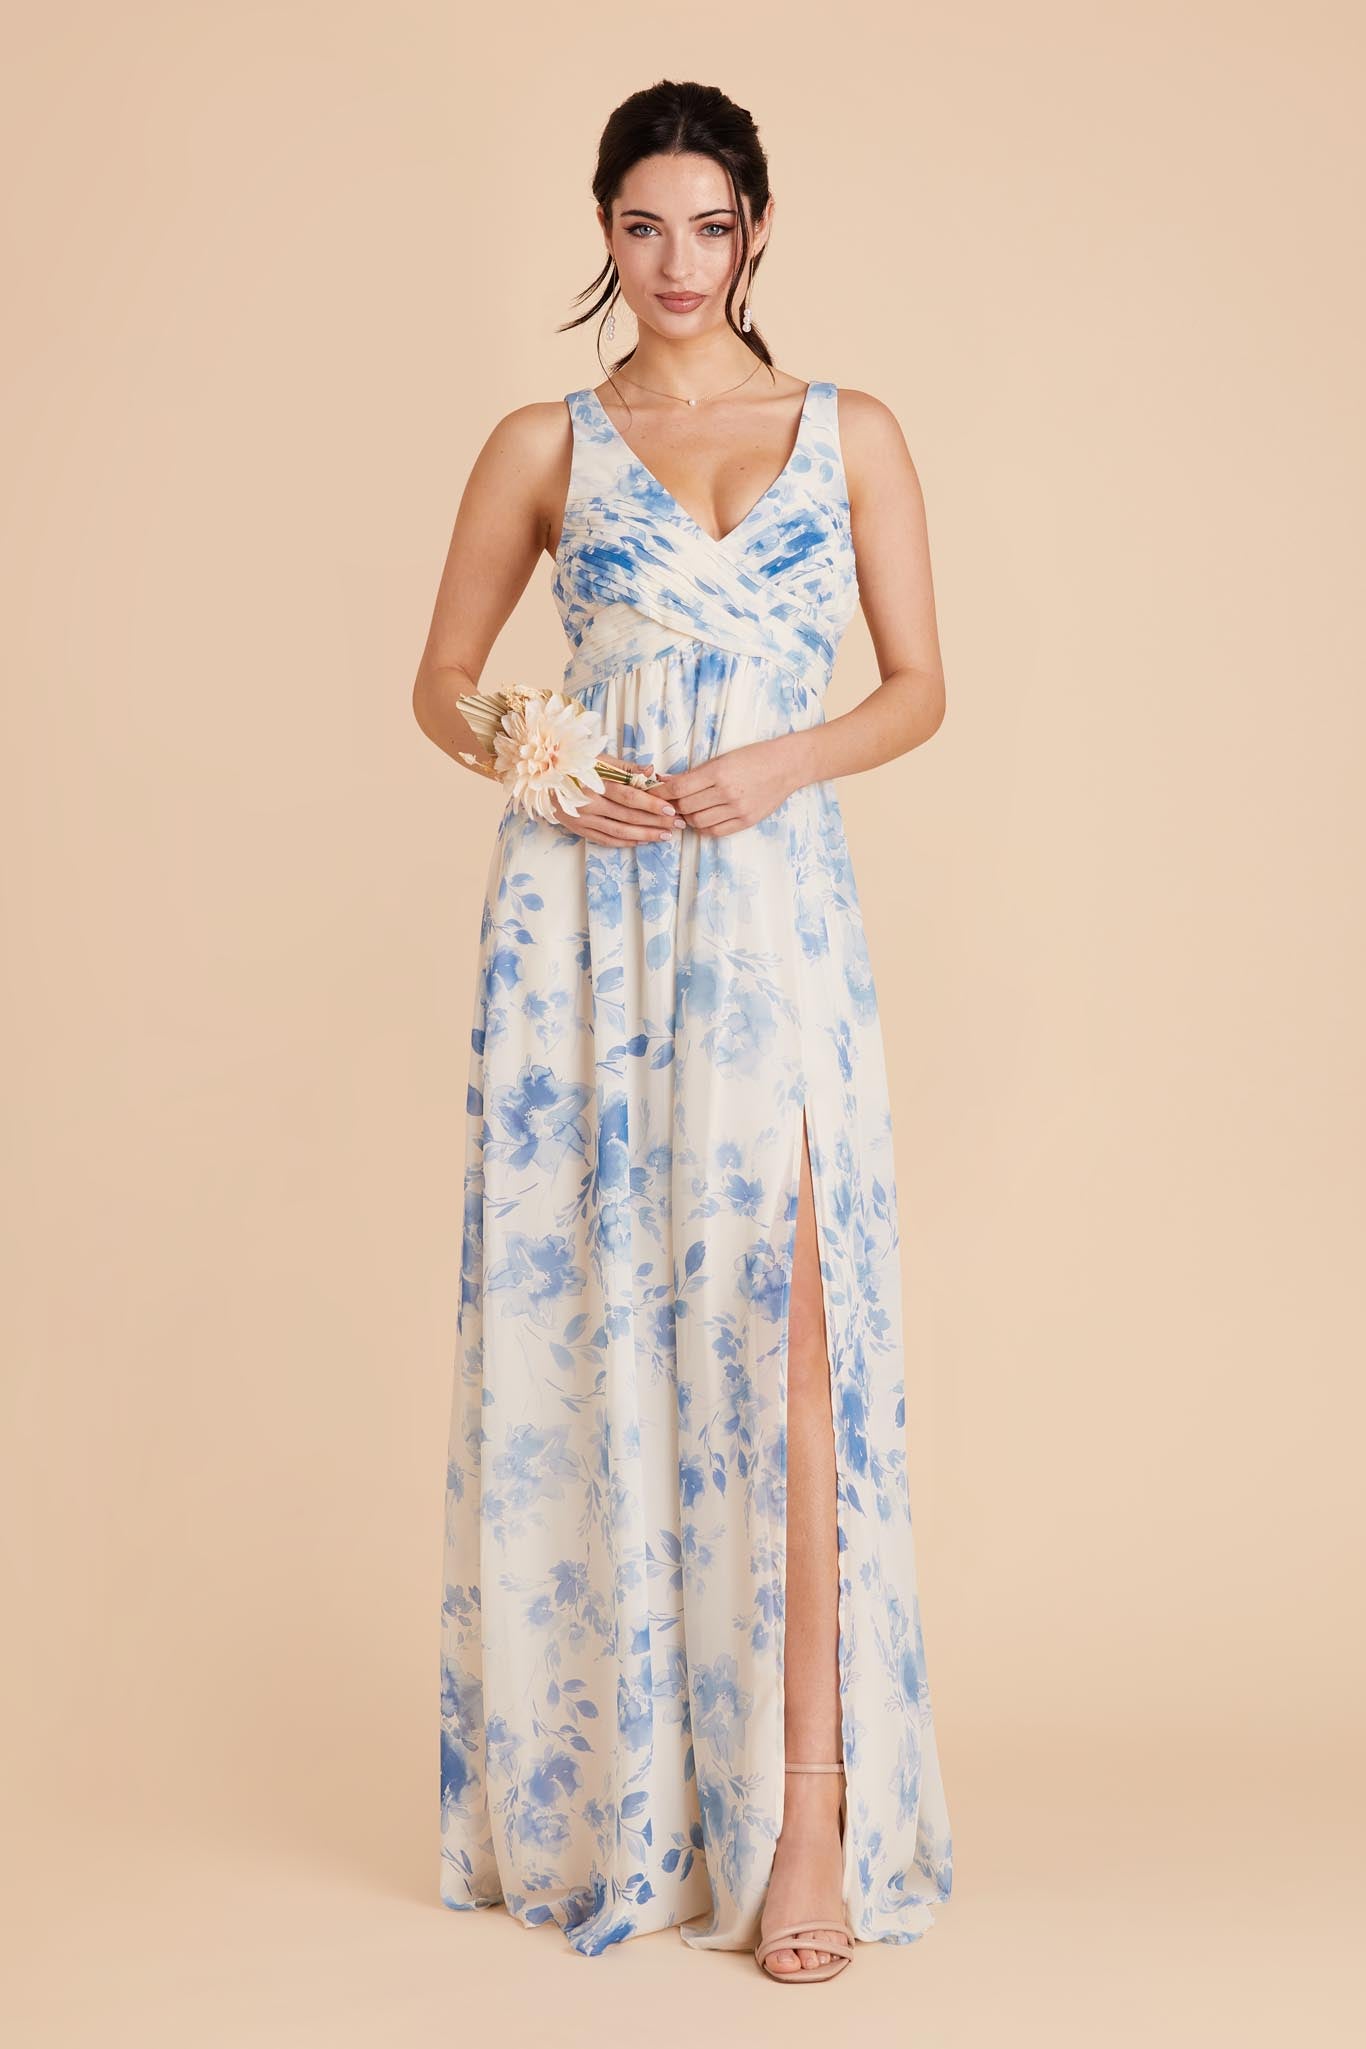 Blue Rococo Floral Laurie Empire Dress by Birdy Grey